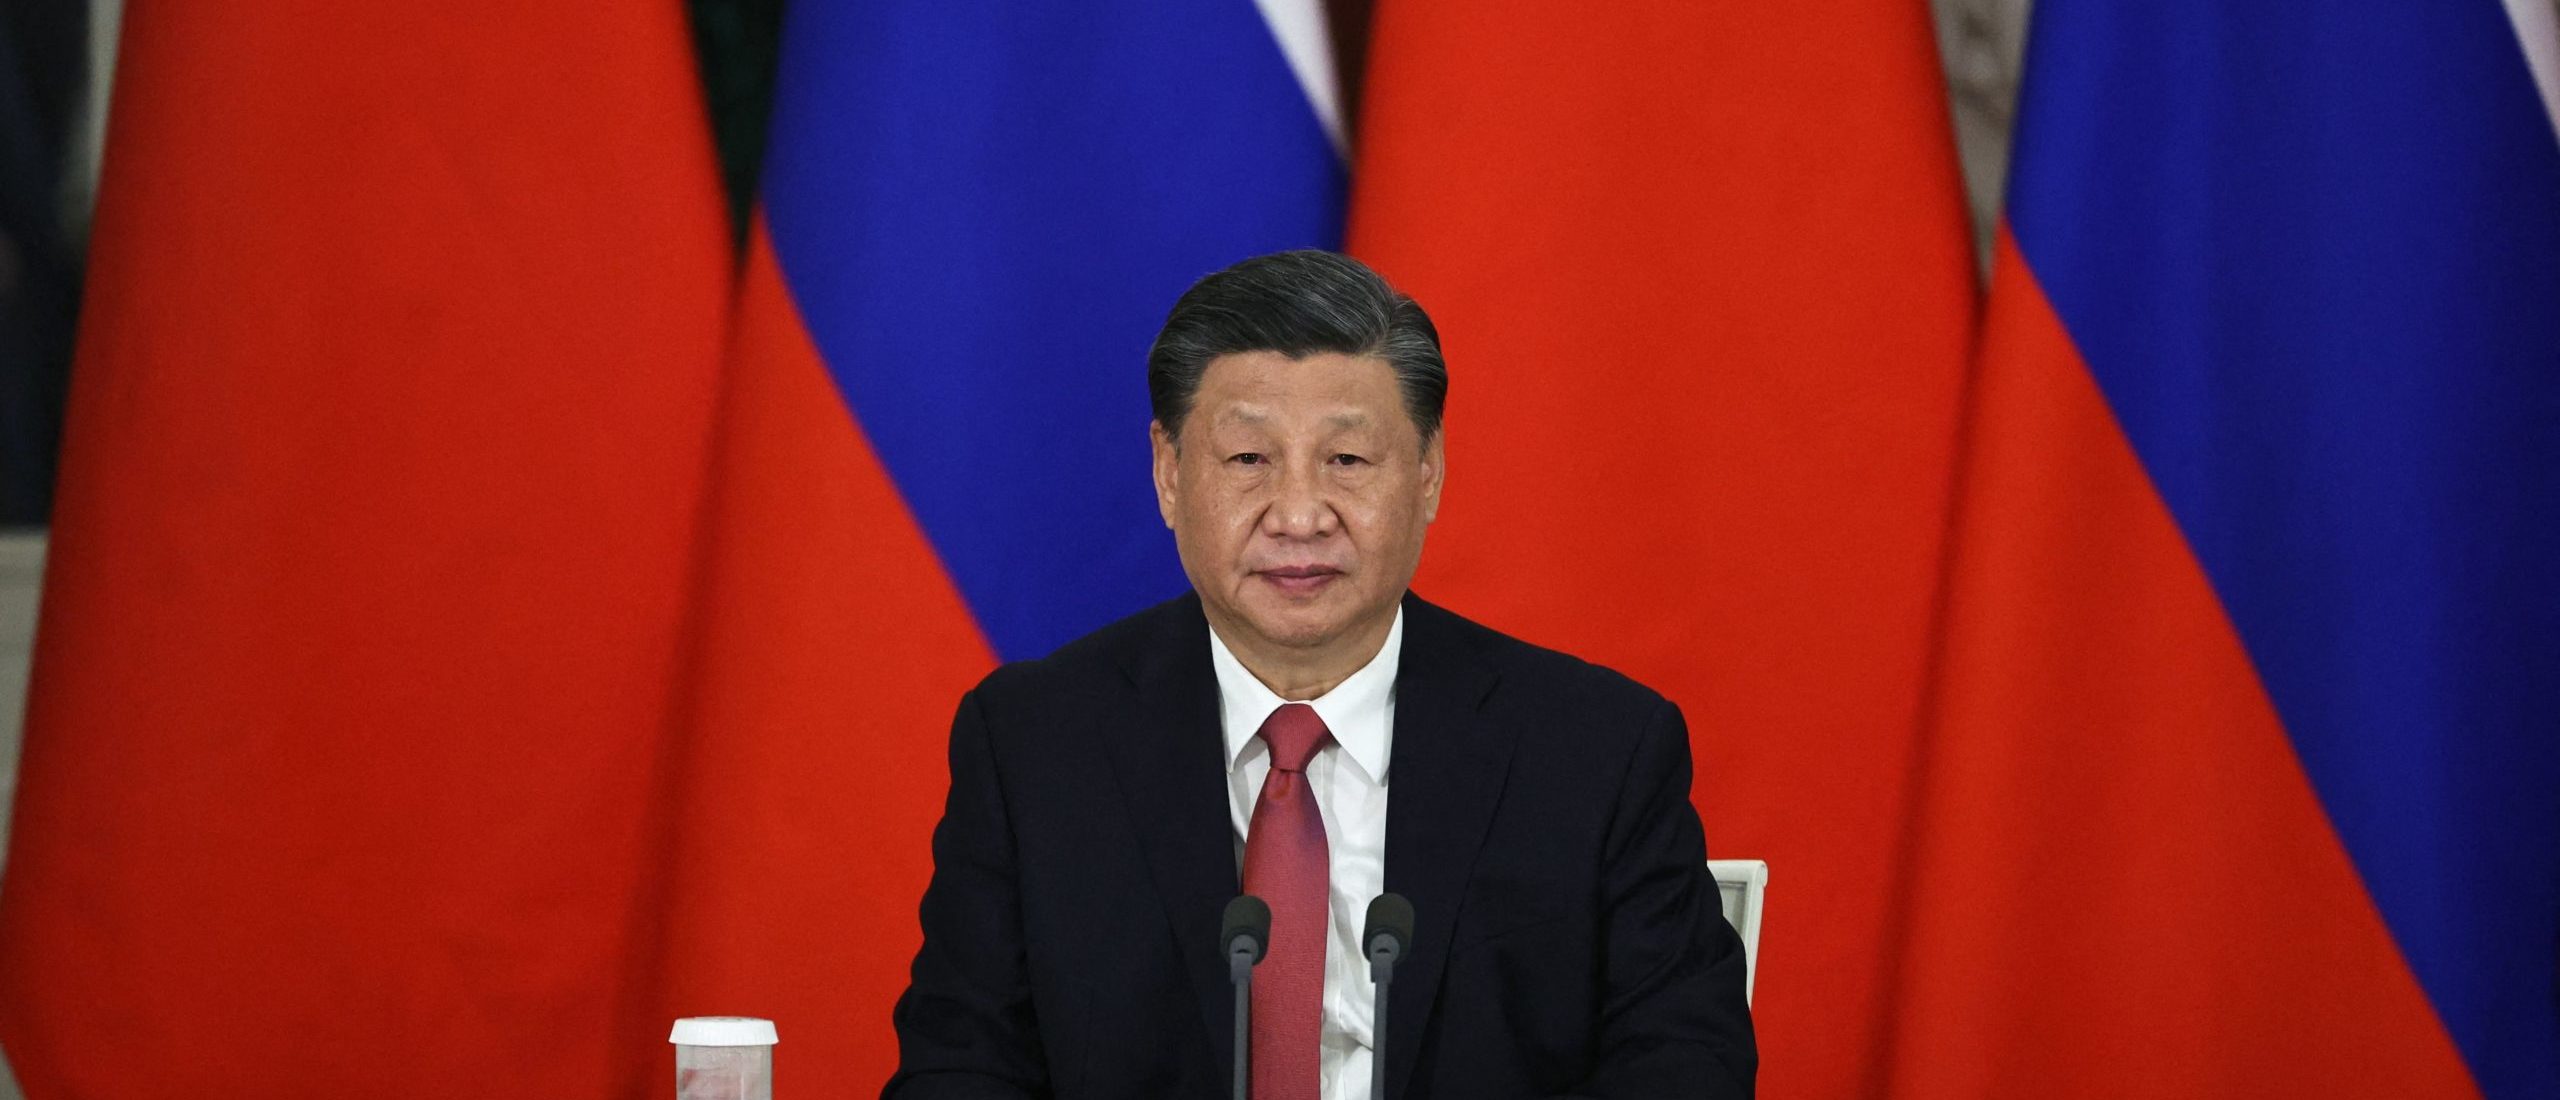 China's President Xi Jinping looks on during a joint statement with his Russian counterpart following their talks at the Kremlin in Moscow on March 21, 2023. (Photo by MIKHAIL TERESHCHENKO/SPUTNIK/AFP via Getty Images)